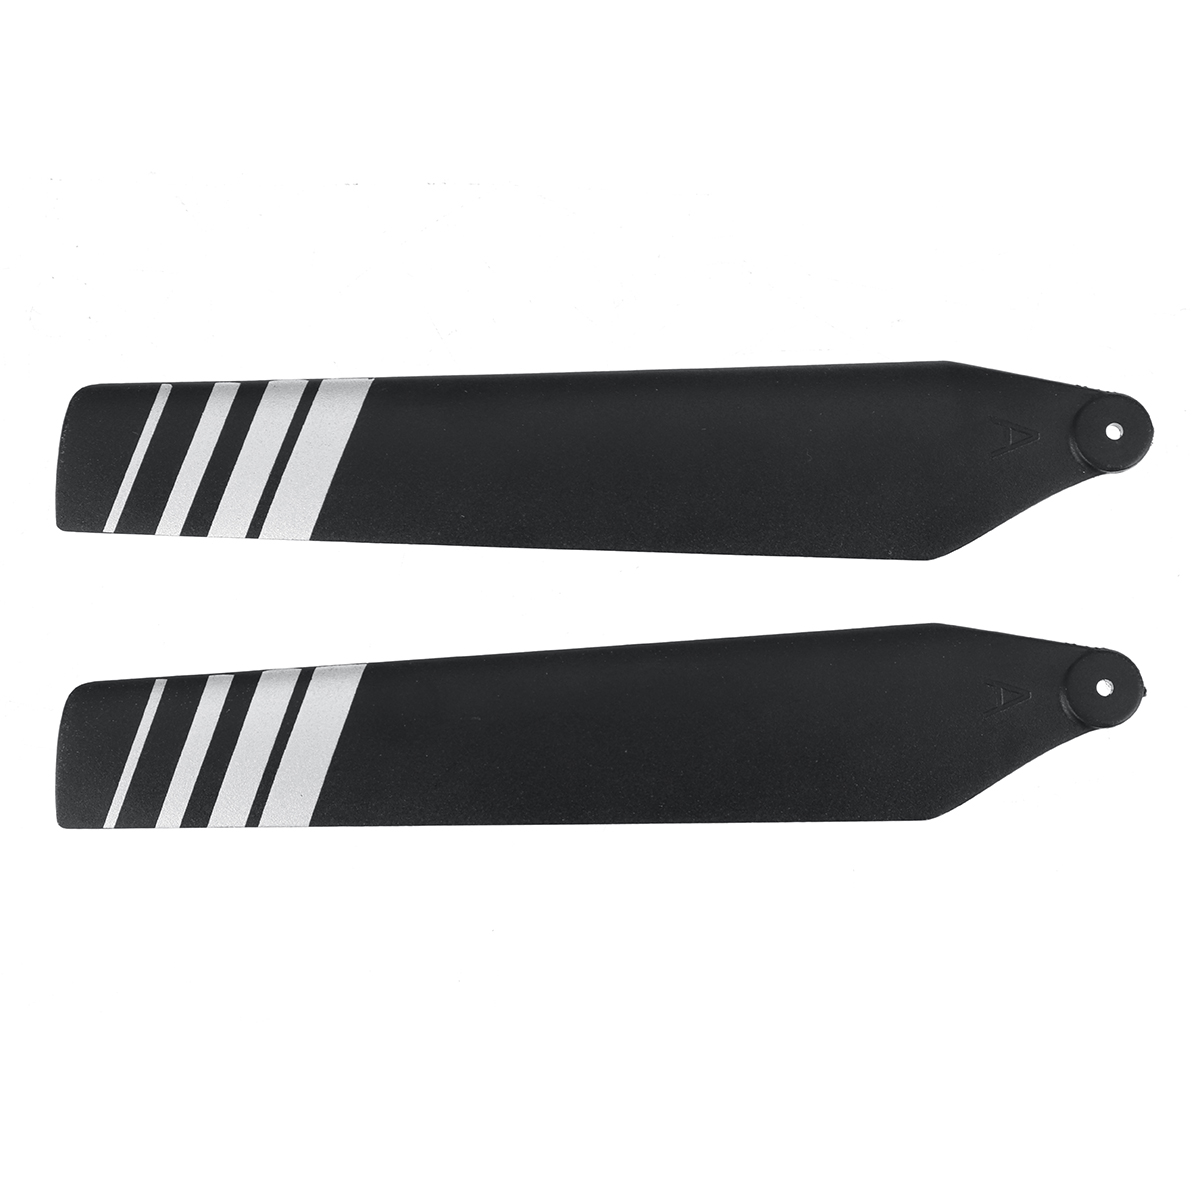 Eachine E110 Main Blade RC Helicopter Parts